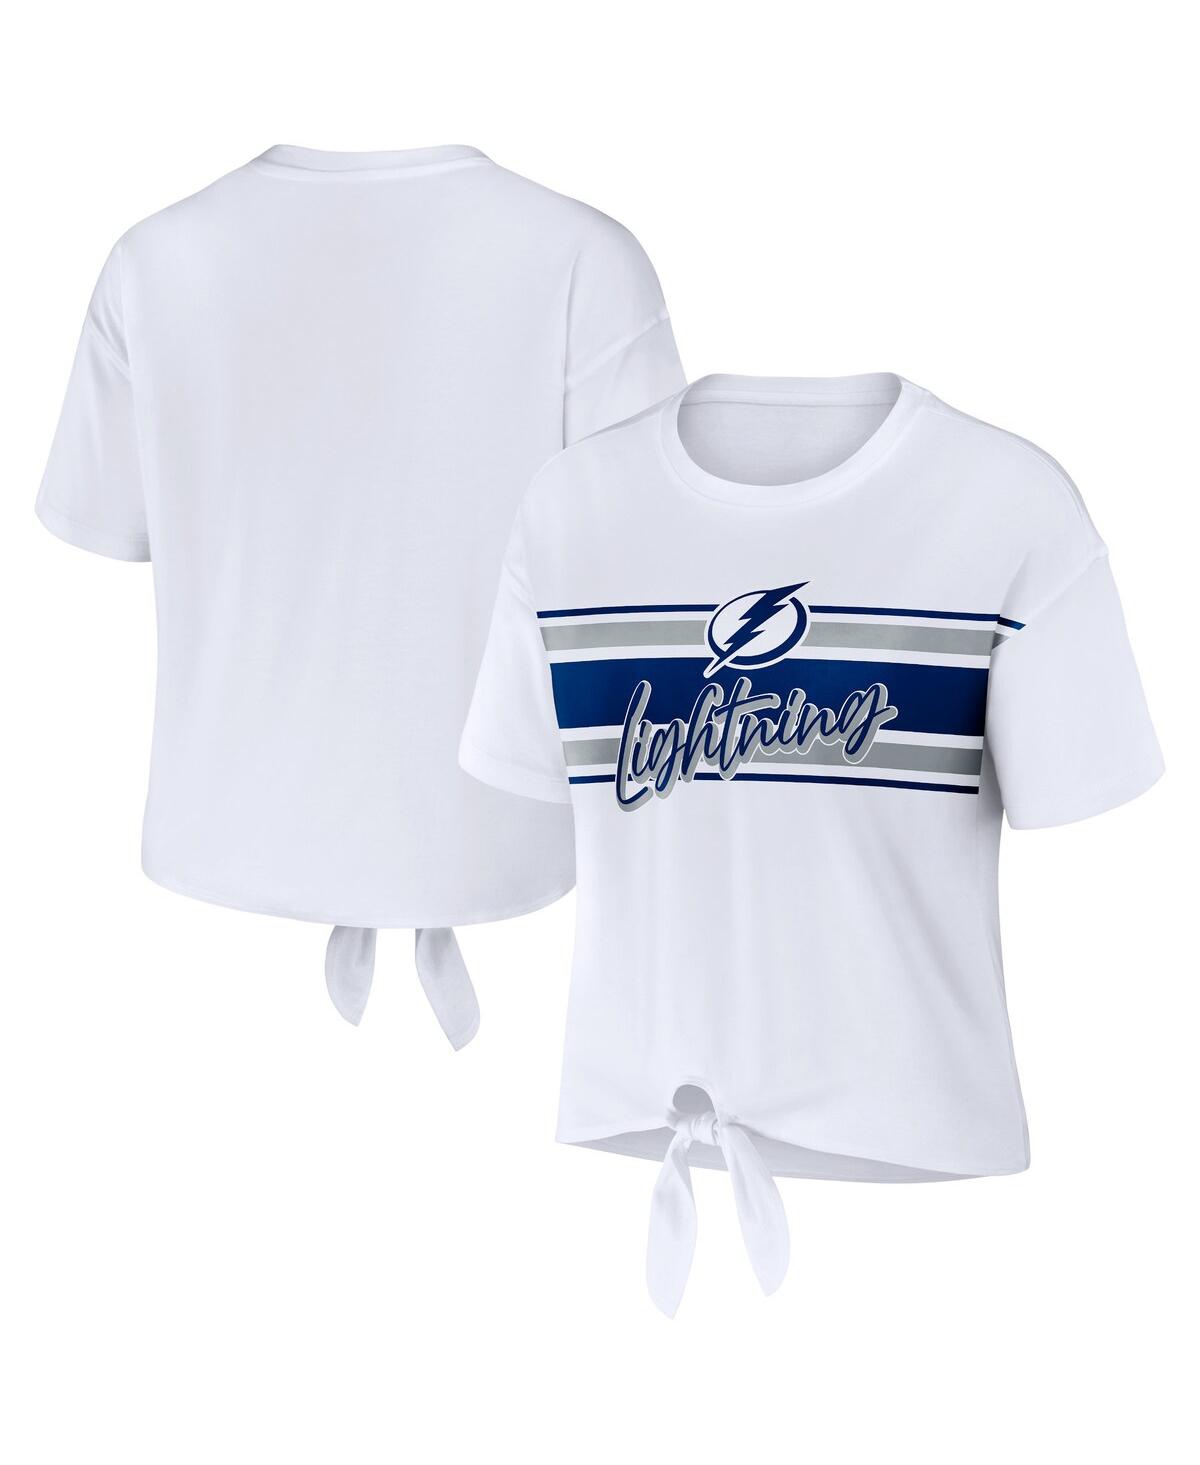 WEAR BY ERIN ANDREWS WOMEN'S WEAR BY ERIN ANDREWS WHITE TAMPA BAY LIGHTNING FRONT KNOT T-SHIRT